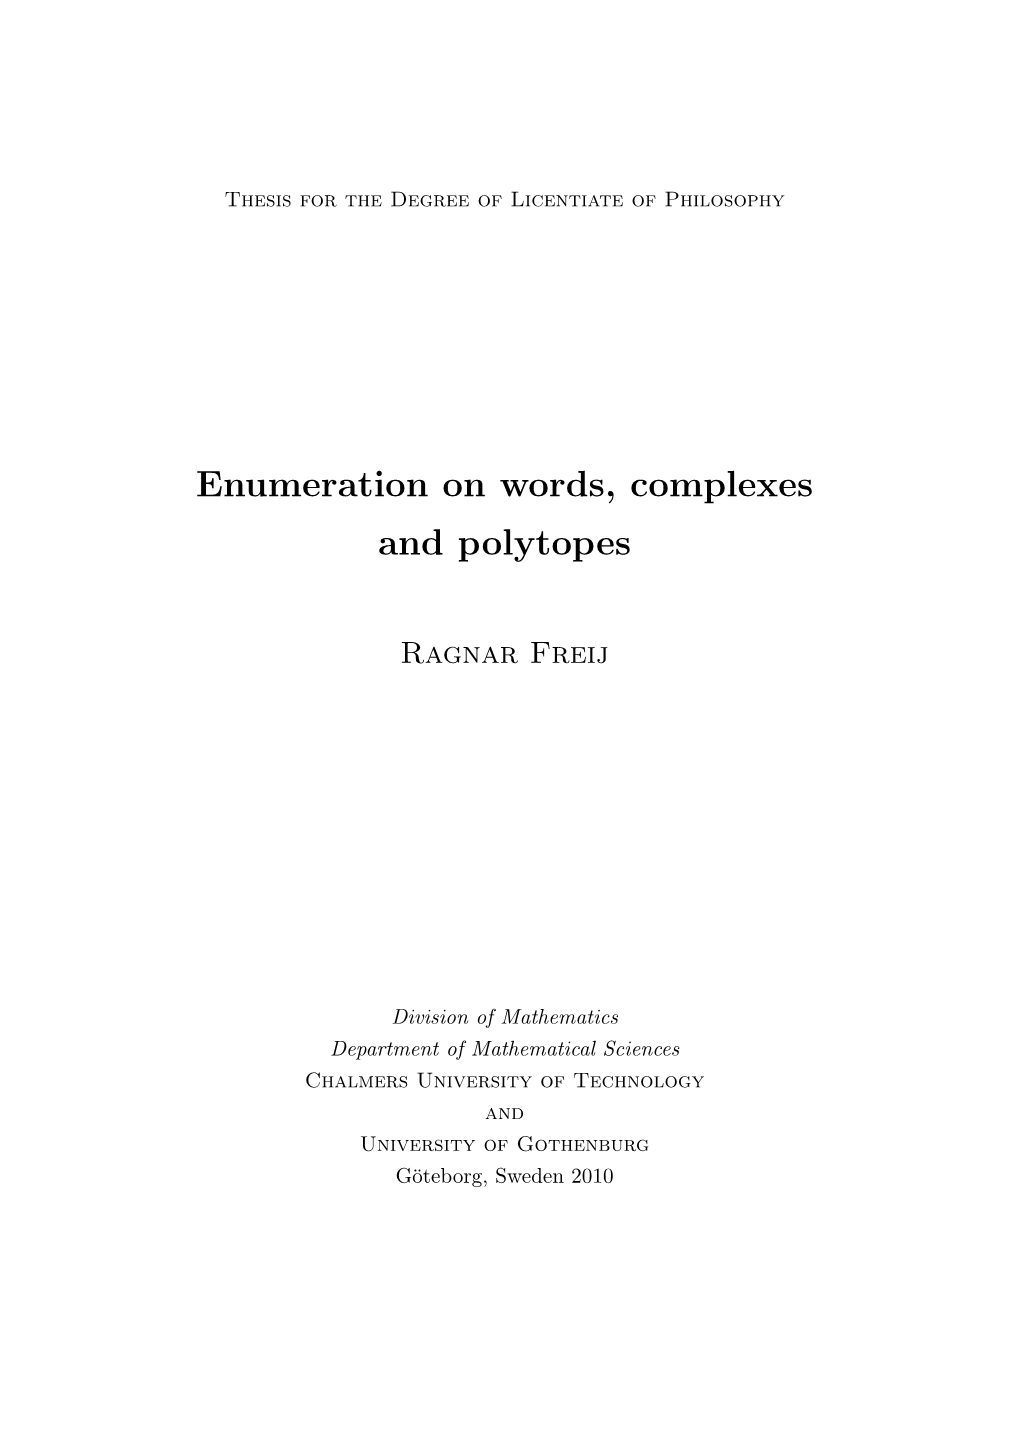 Enumeration on Words, Complexes and Polytopes